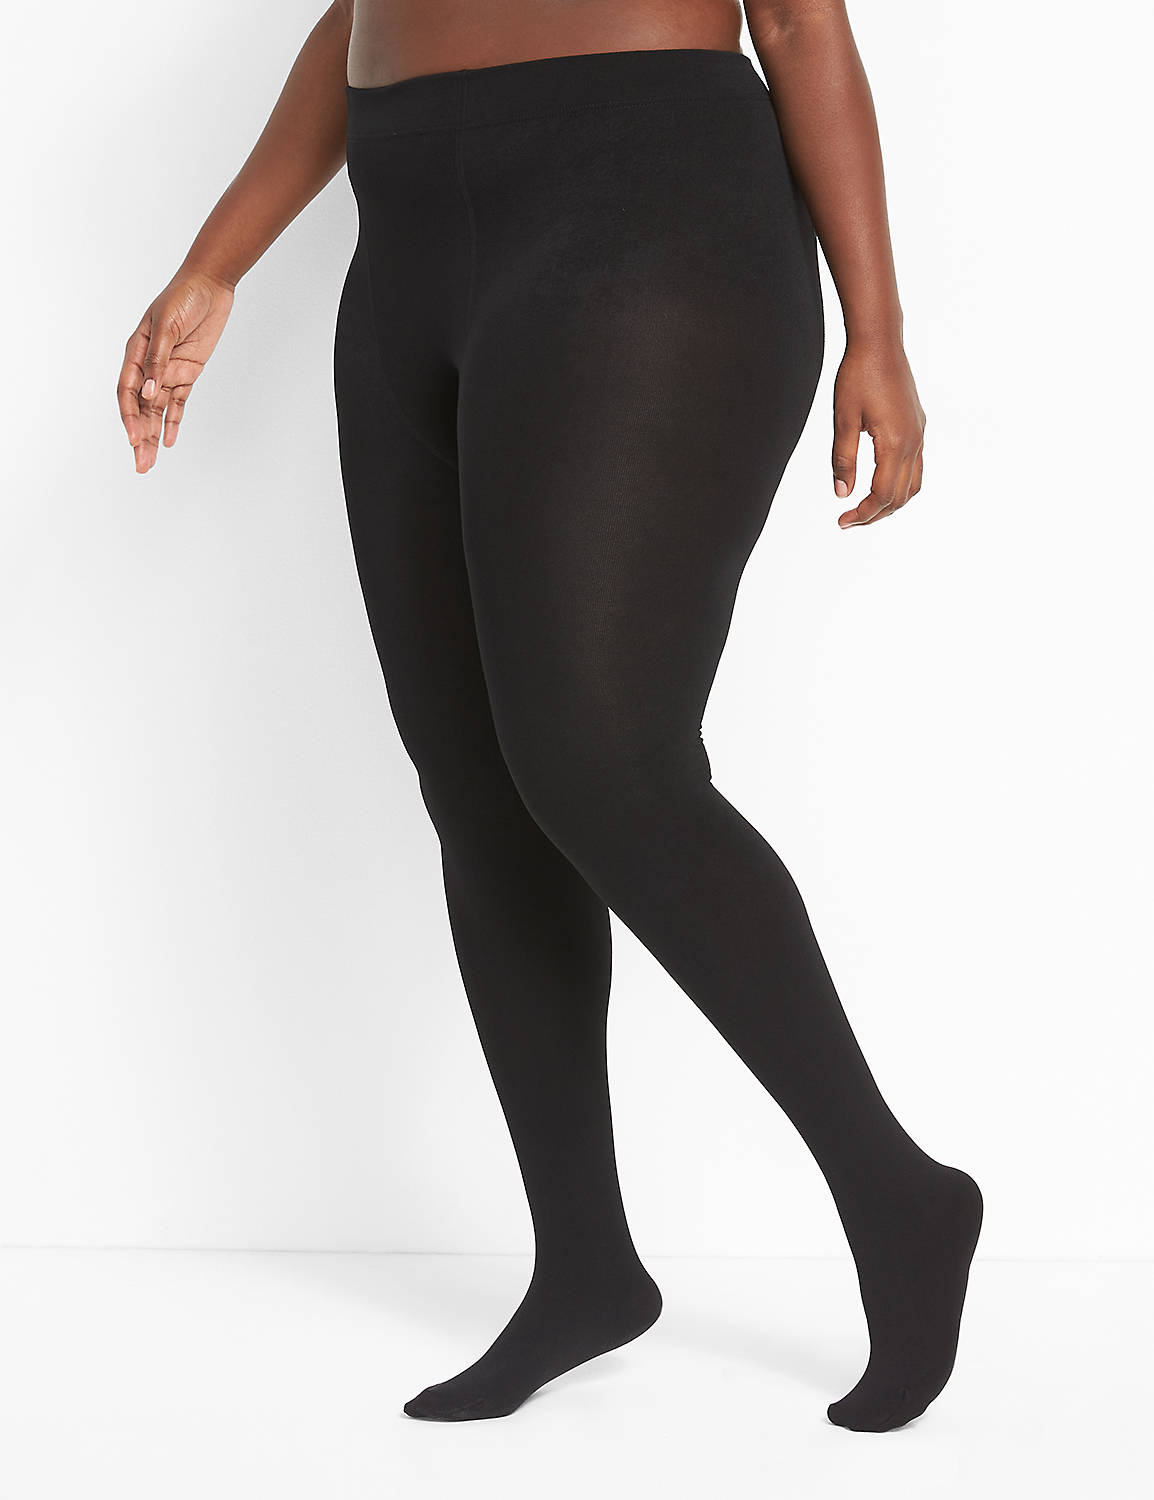 Fleece-Lined Tights - 80D - Super Opaque Product Image 1